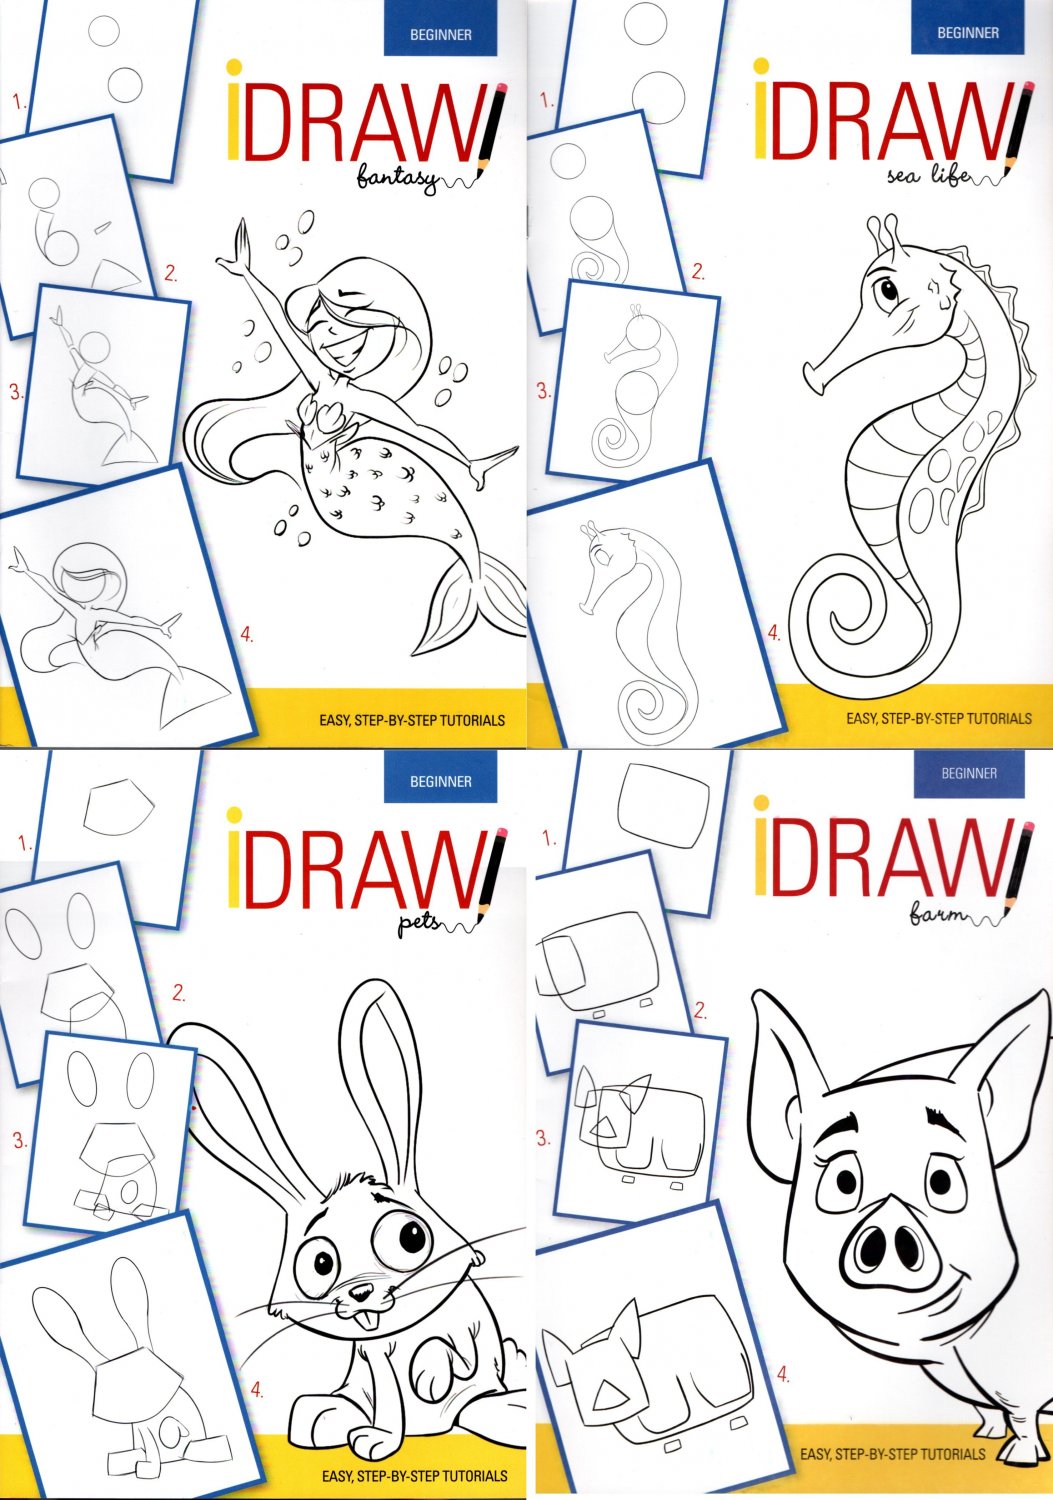 iDraw - Learn to Draw Instructional Step-by-Step Tutorial Books - (Set of 4 Books)